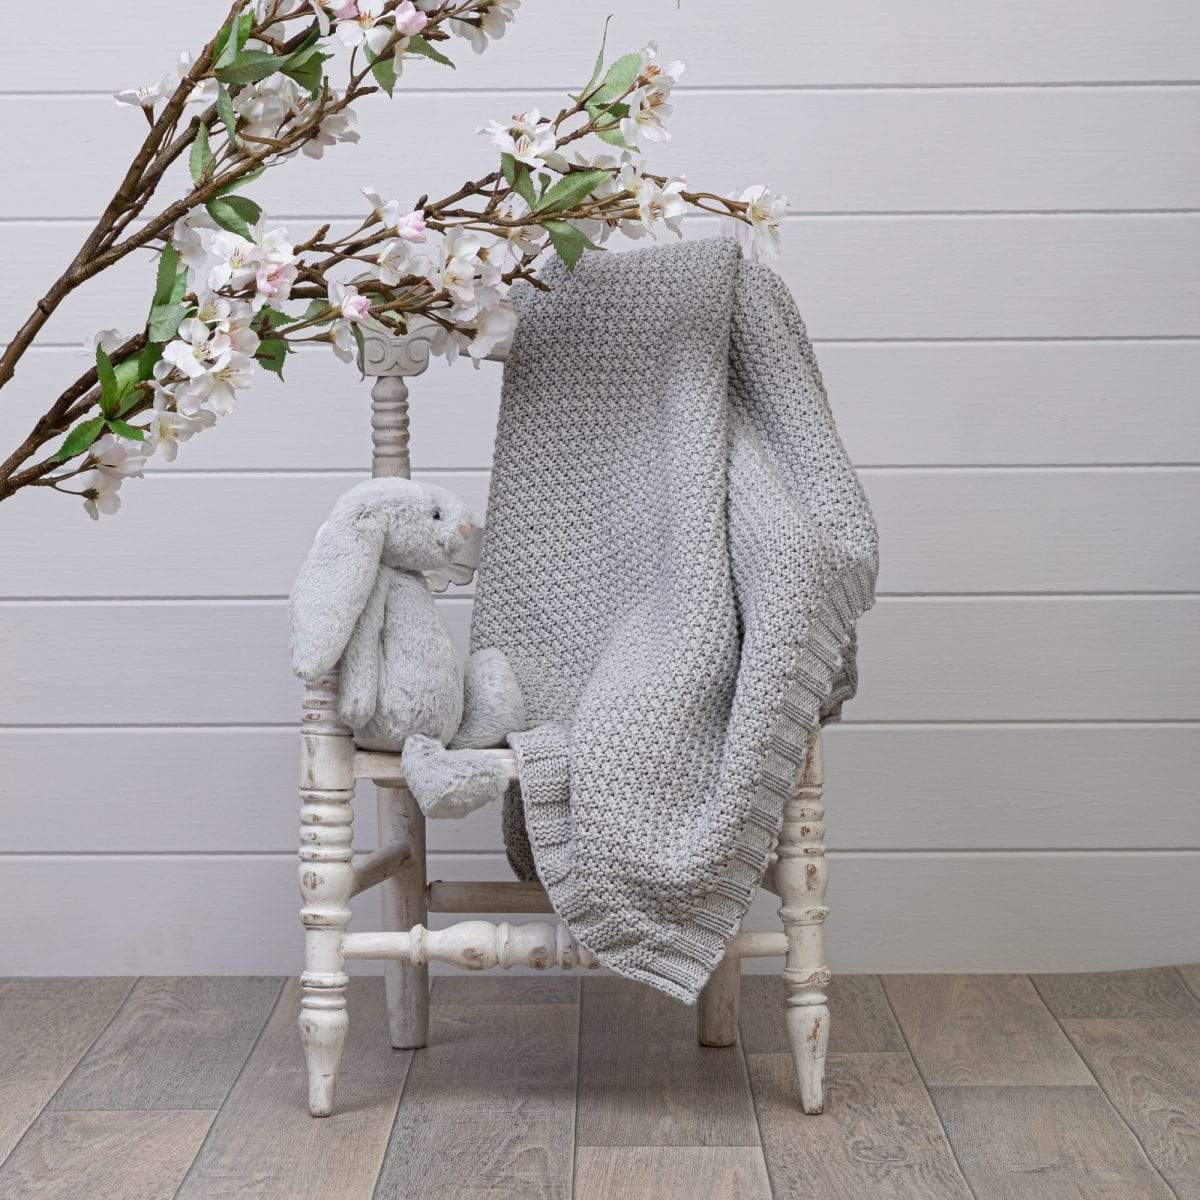 Classic Grey Baby Blanket on Chair - Bumbles &amp; Boo